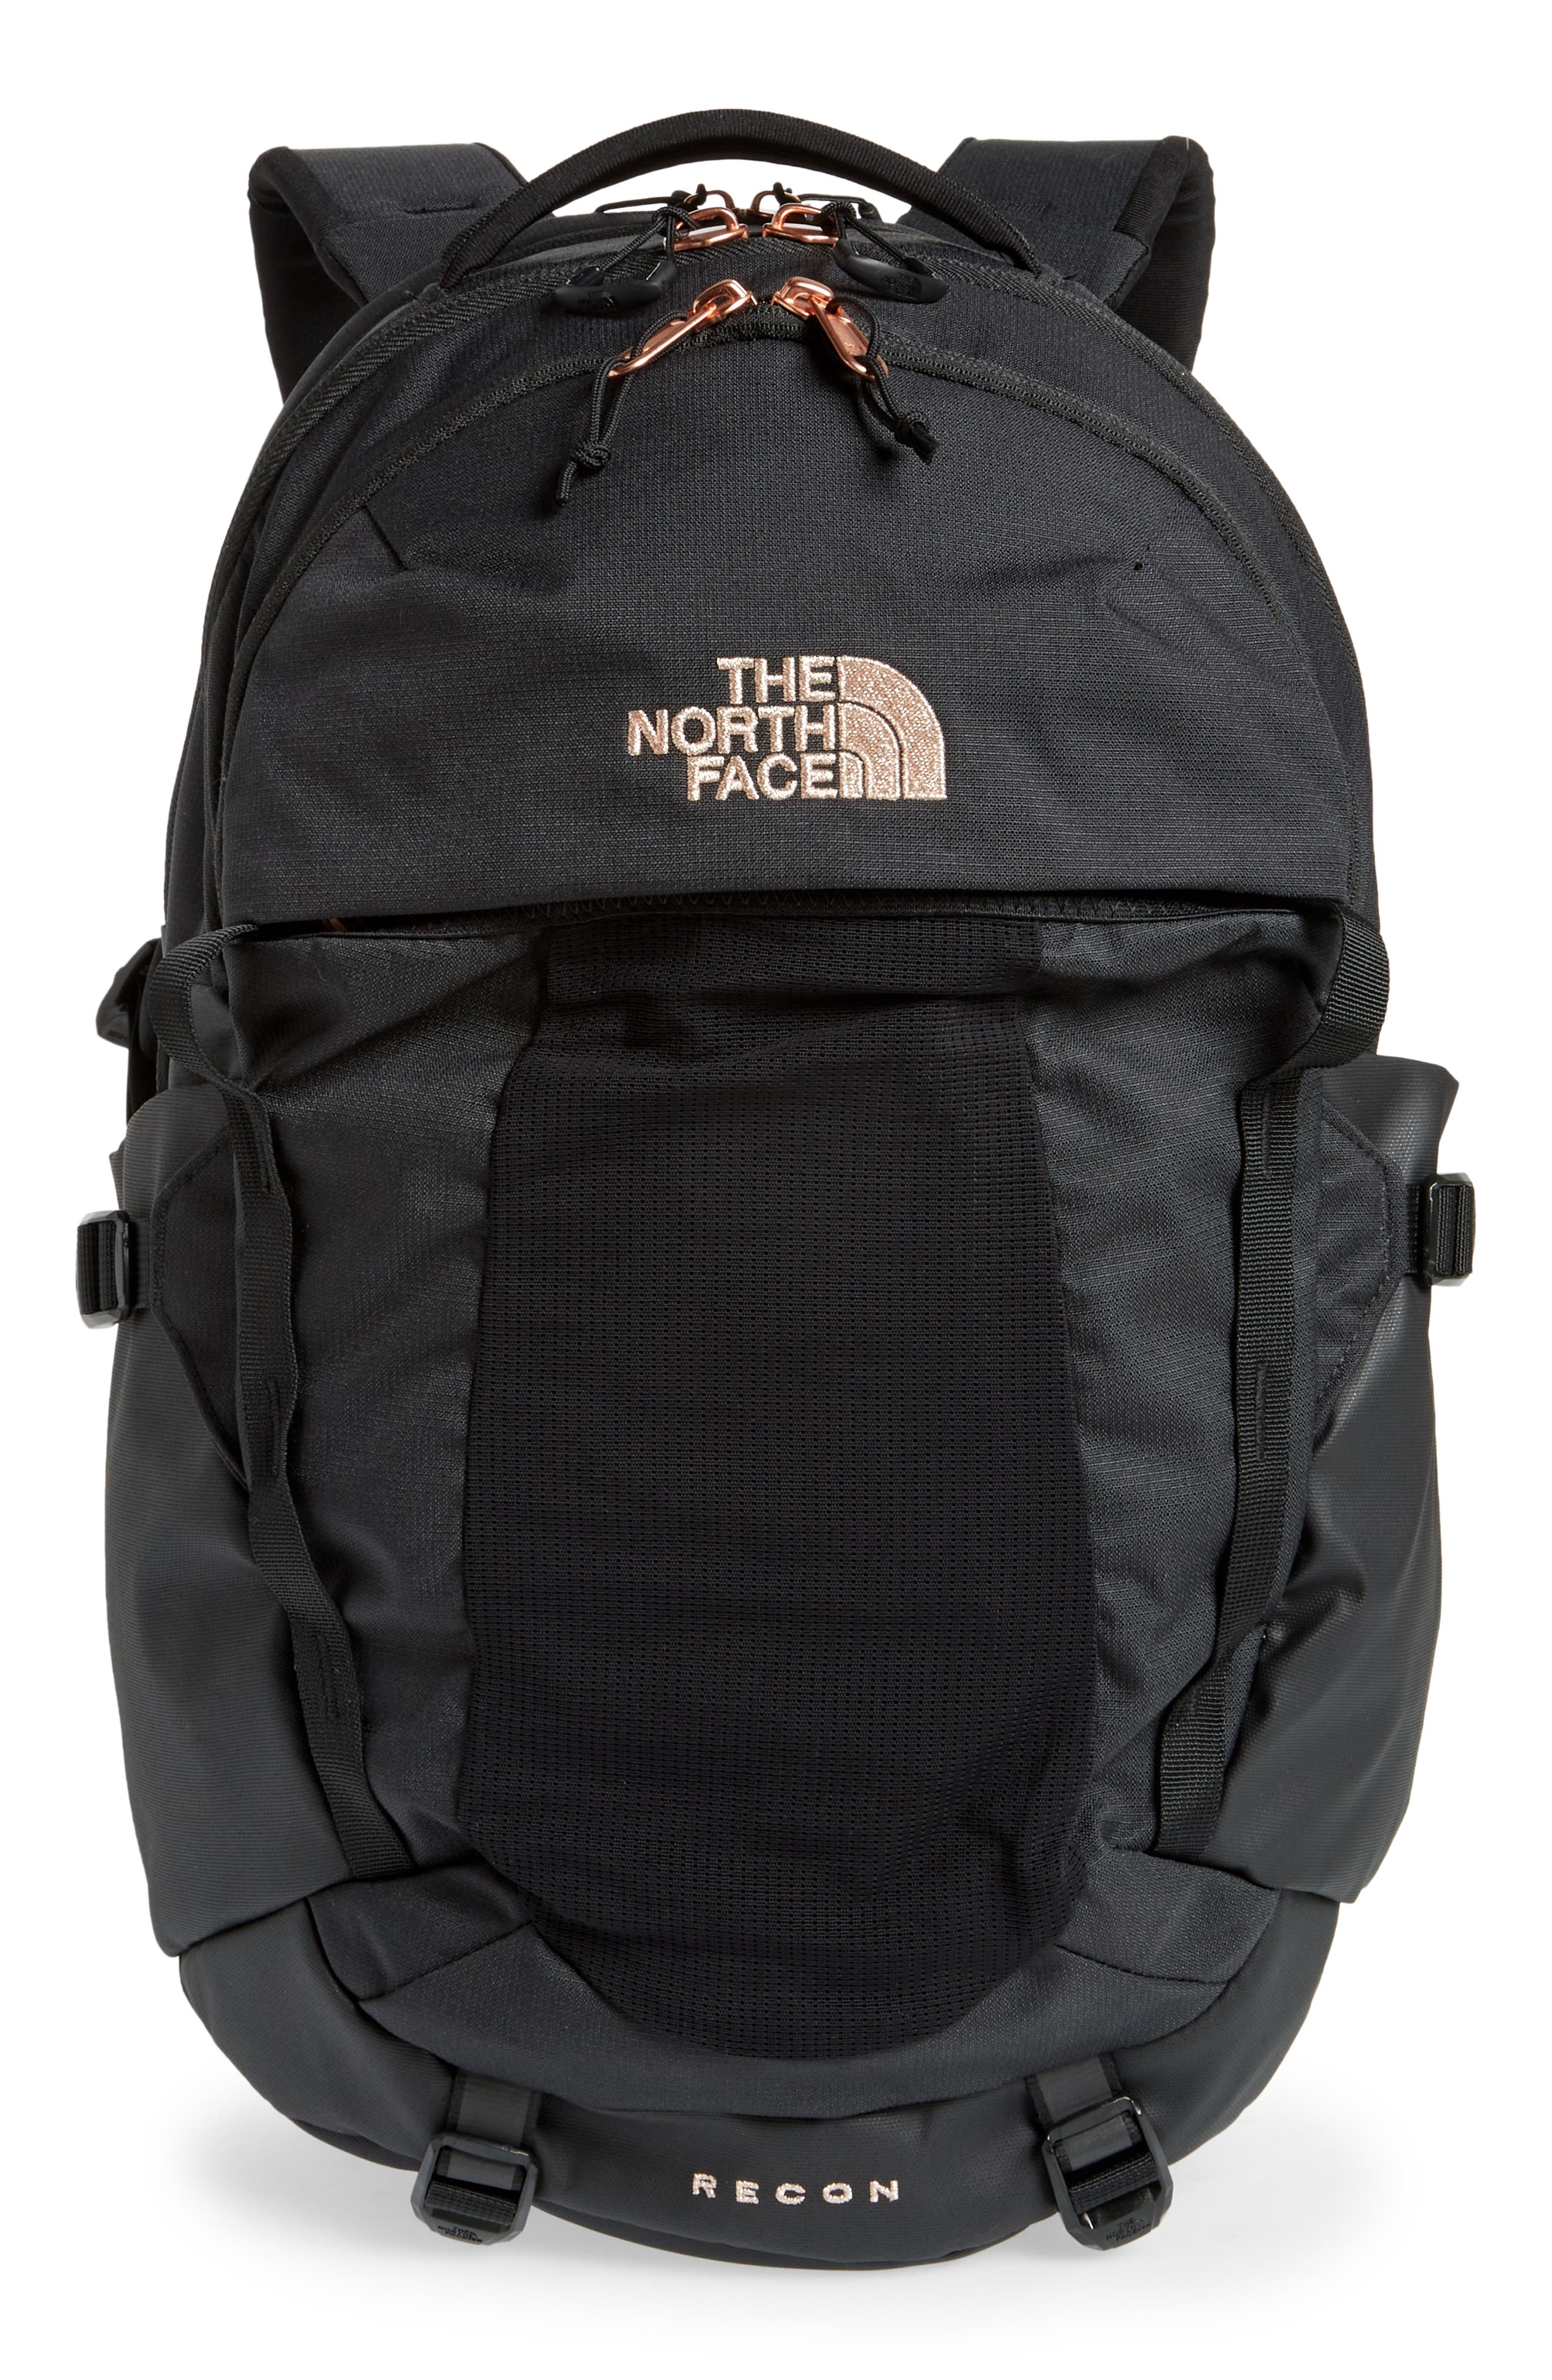 The North Face Recon 24L Backpack in Black Burnt Coral at Nordstrom